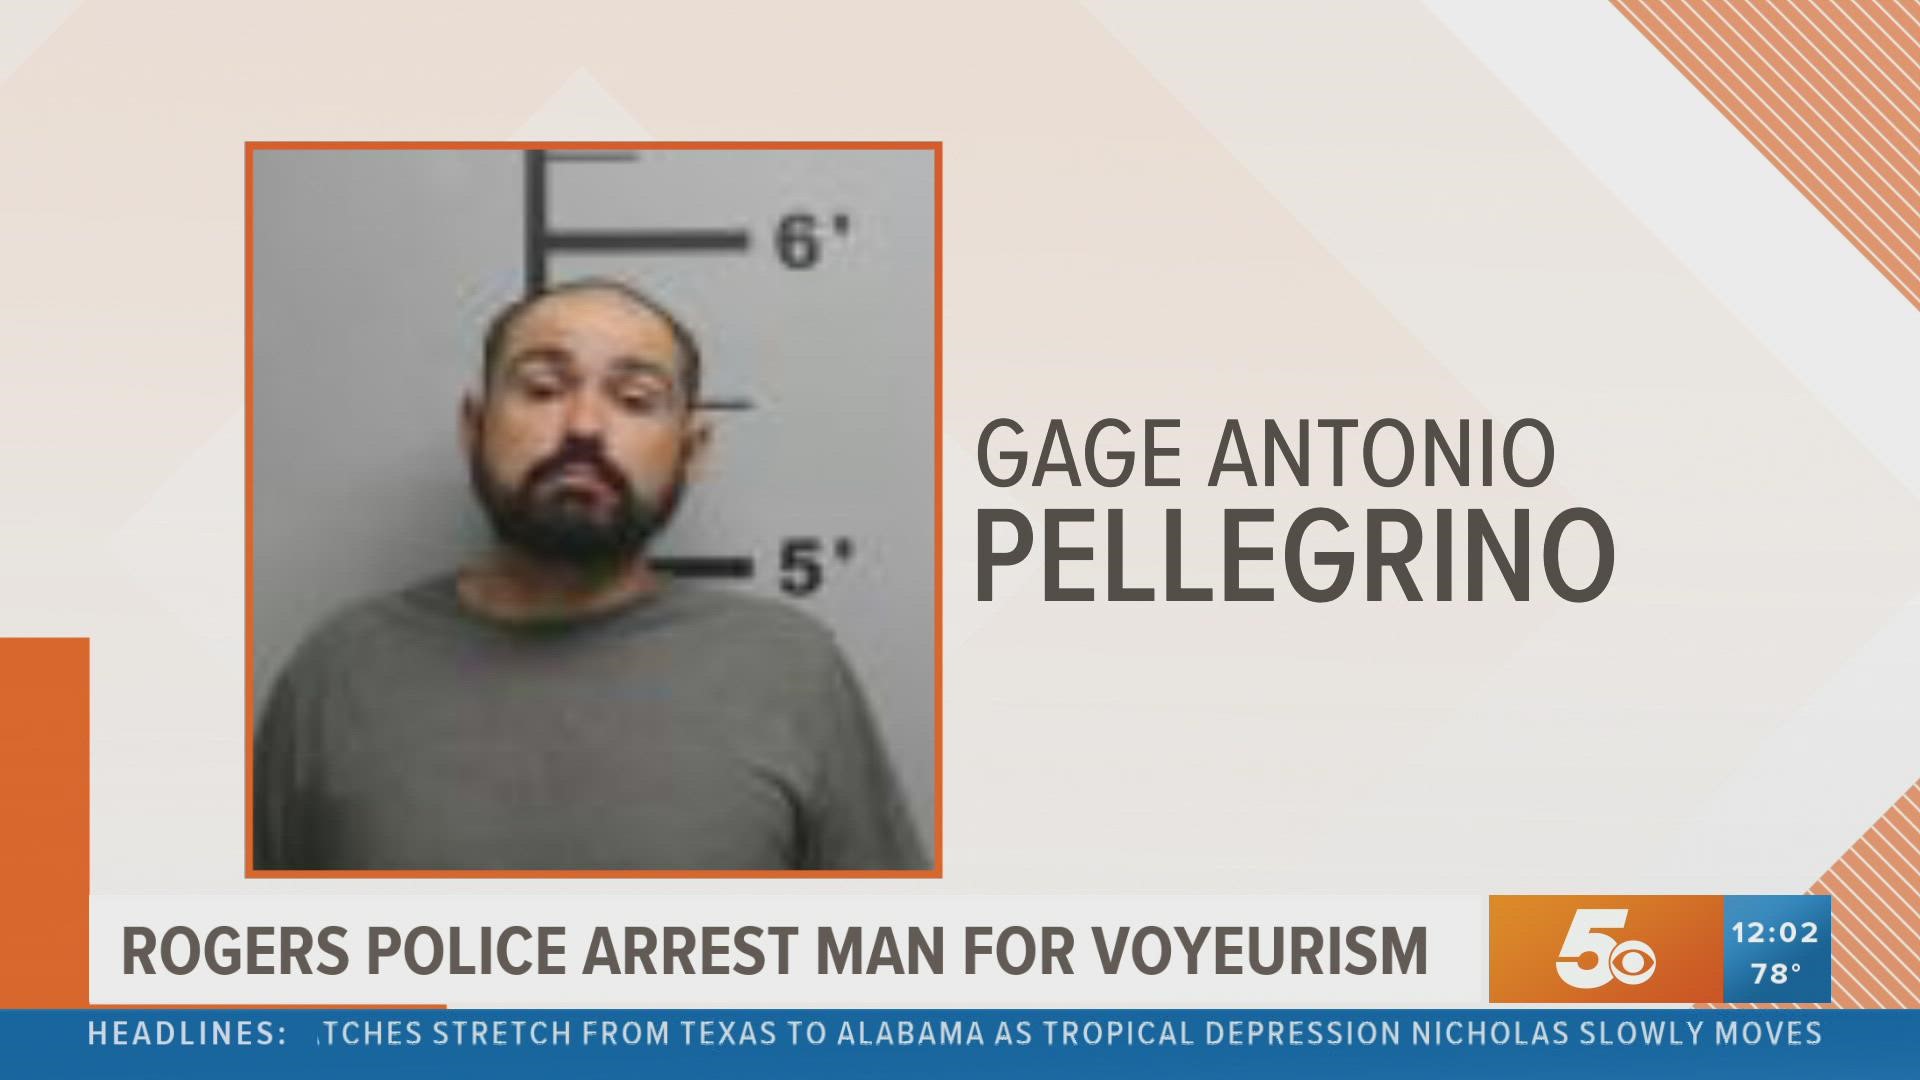 Rogers Police arrested a man this weekend on several charges including voyeurism and stocking. Gage Antonio Pellegrino